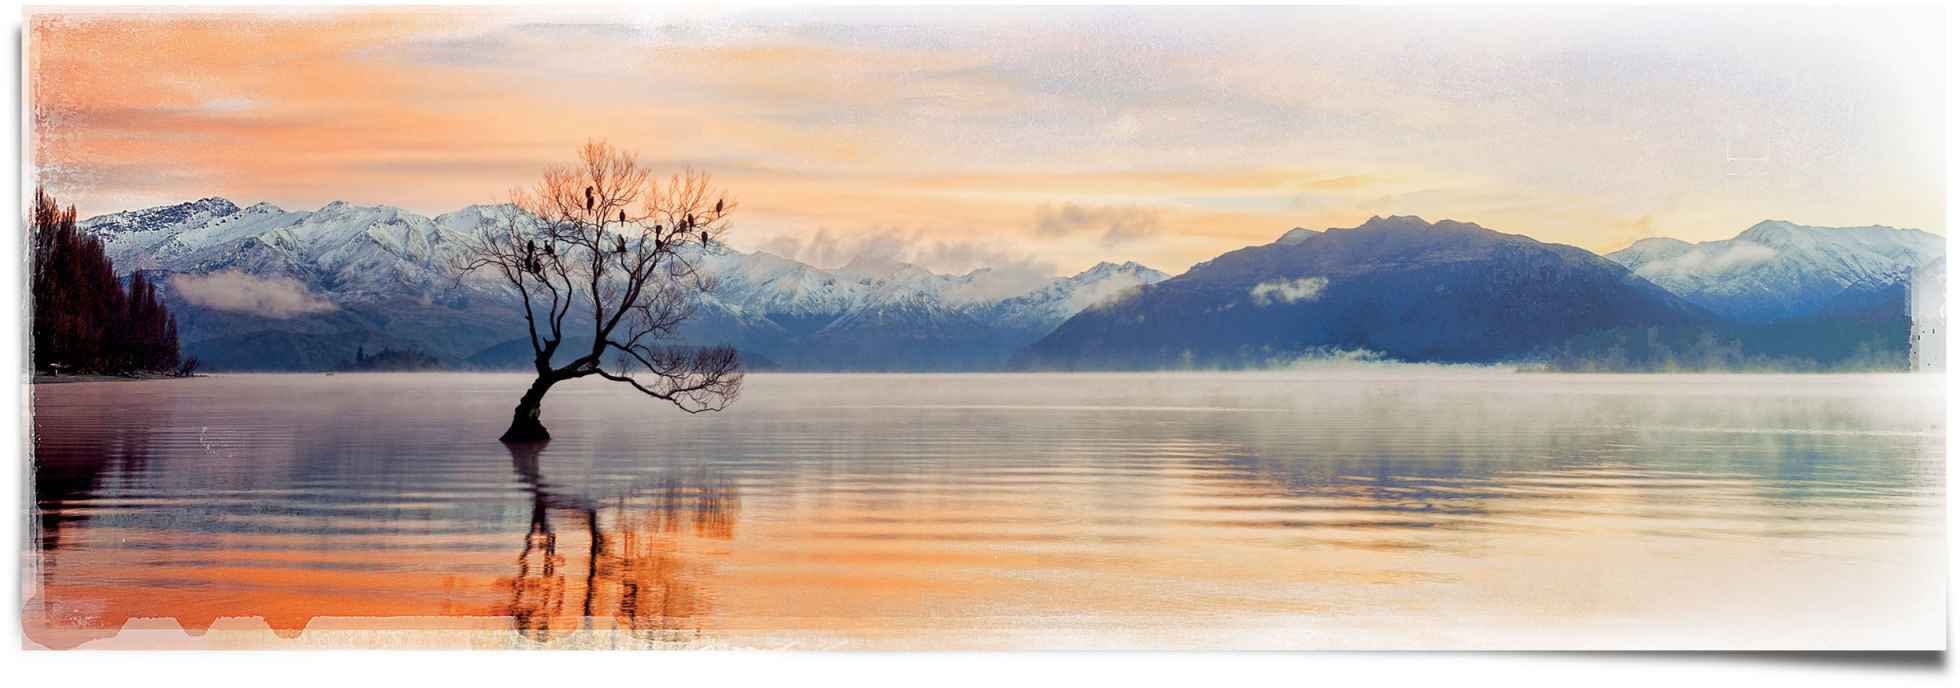 Reinders! Poster Wanaka See Aussicht, (1 St) | Poster